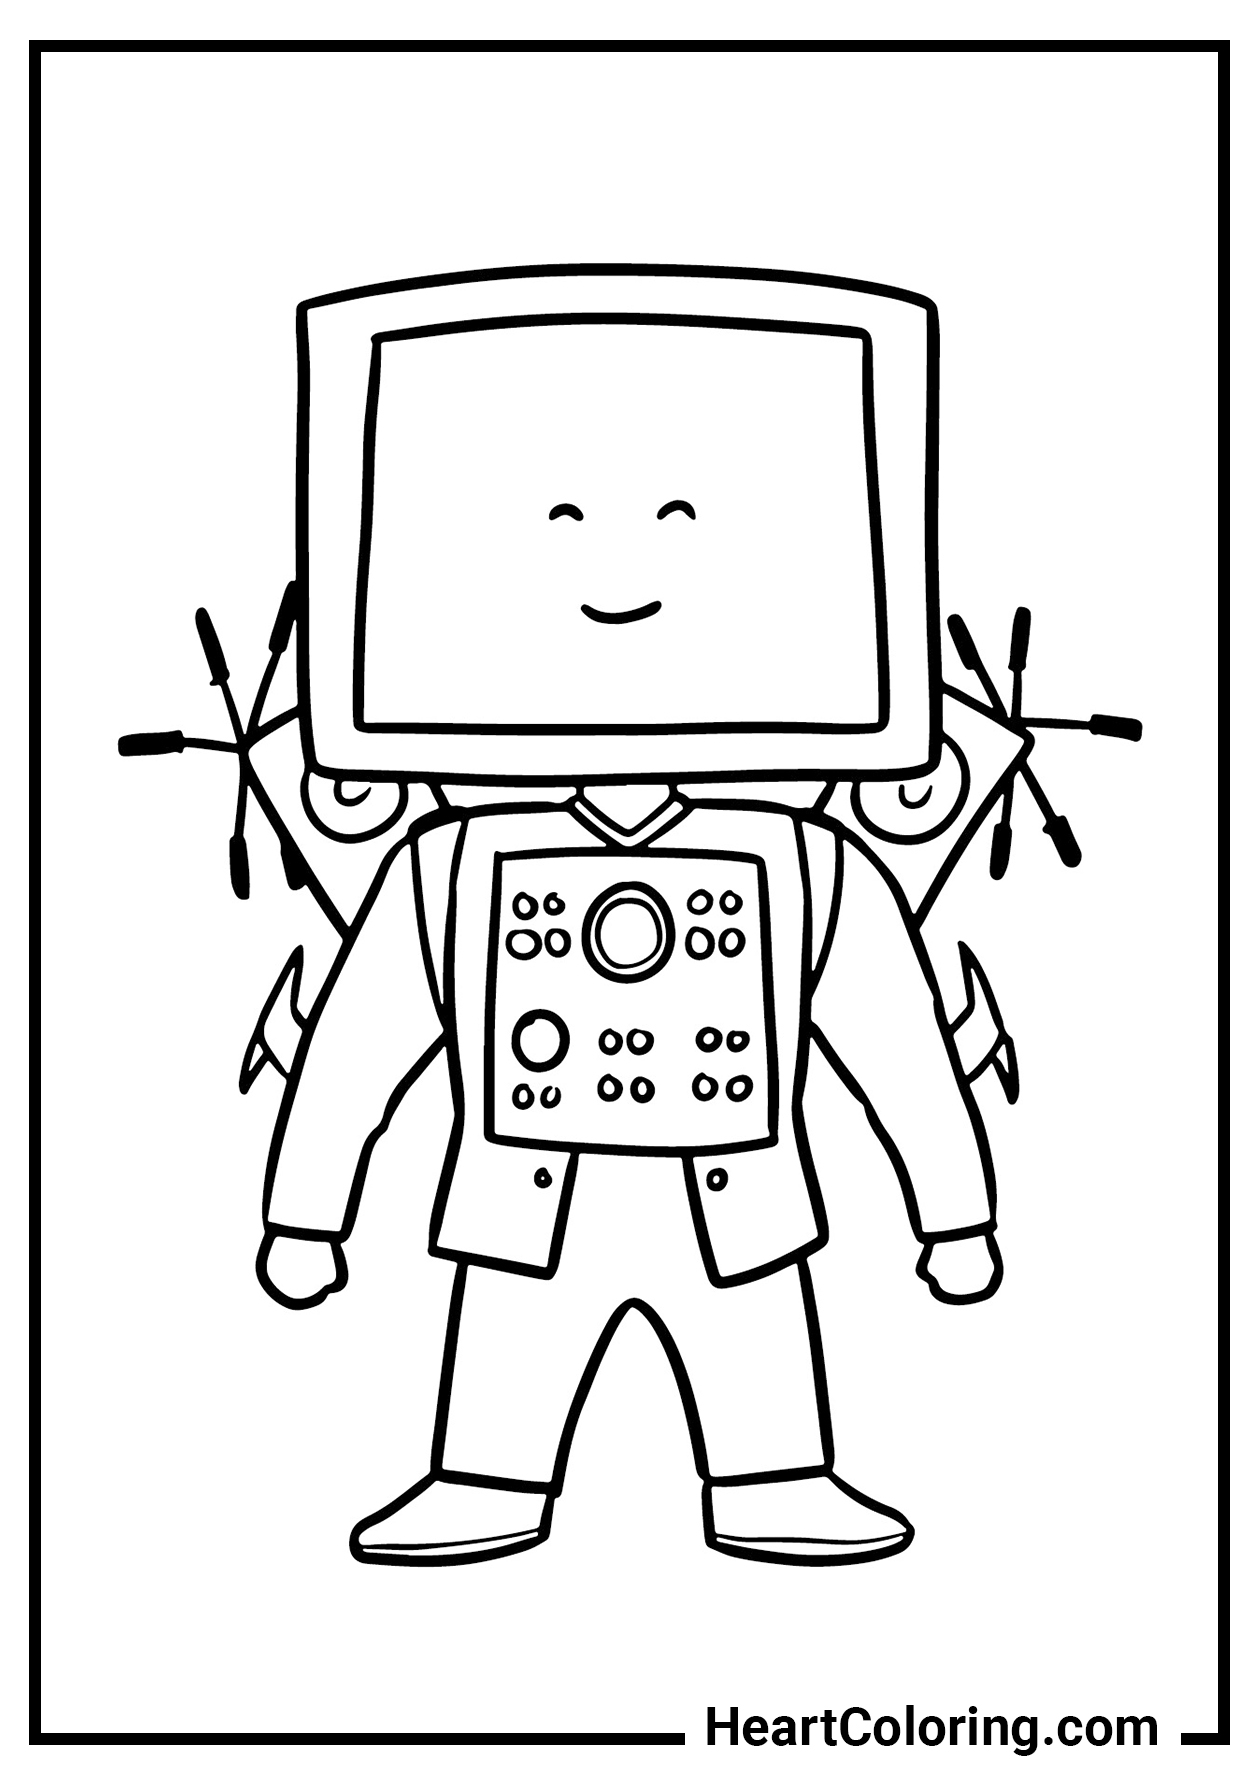 Coloring pages of TVMan from Skibidi ...